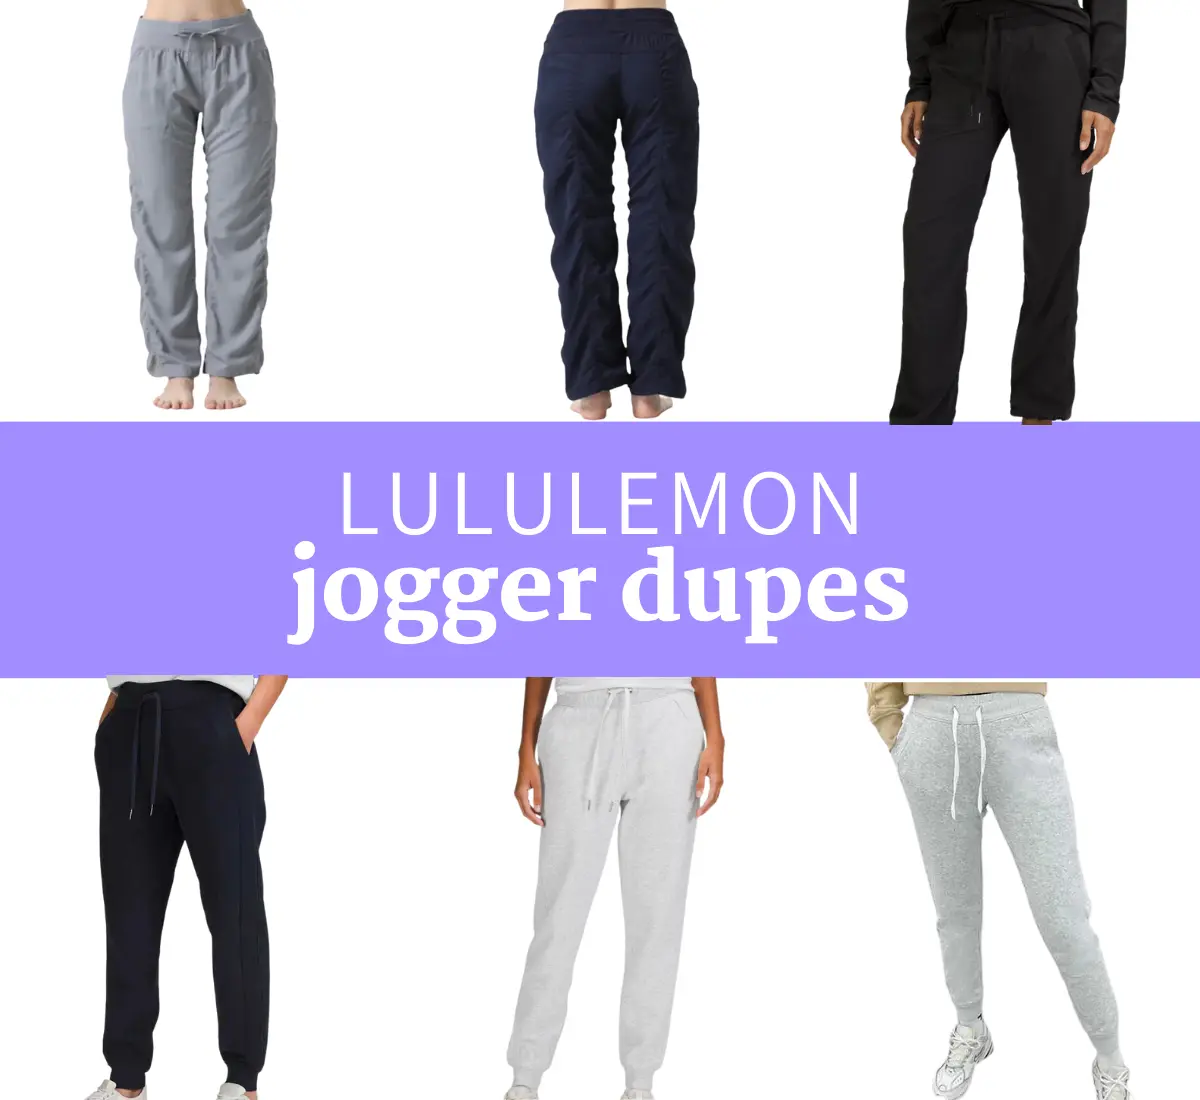 Top 2 best lululemon joggers dupes (from $25)